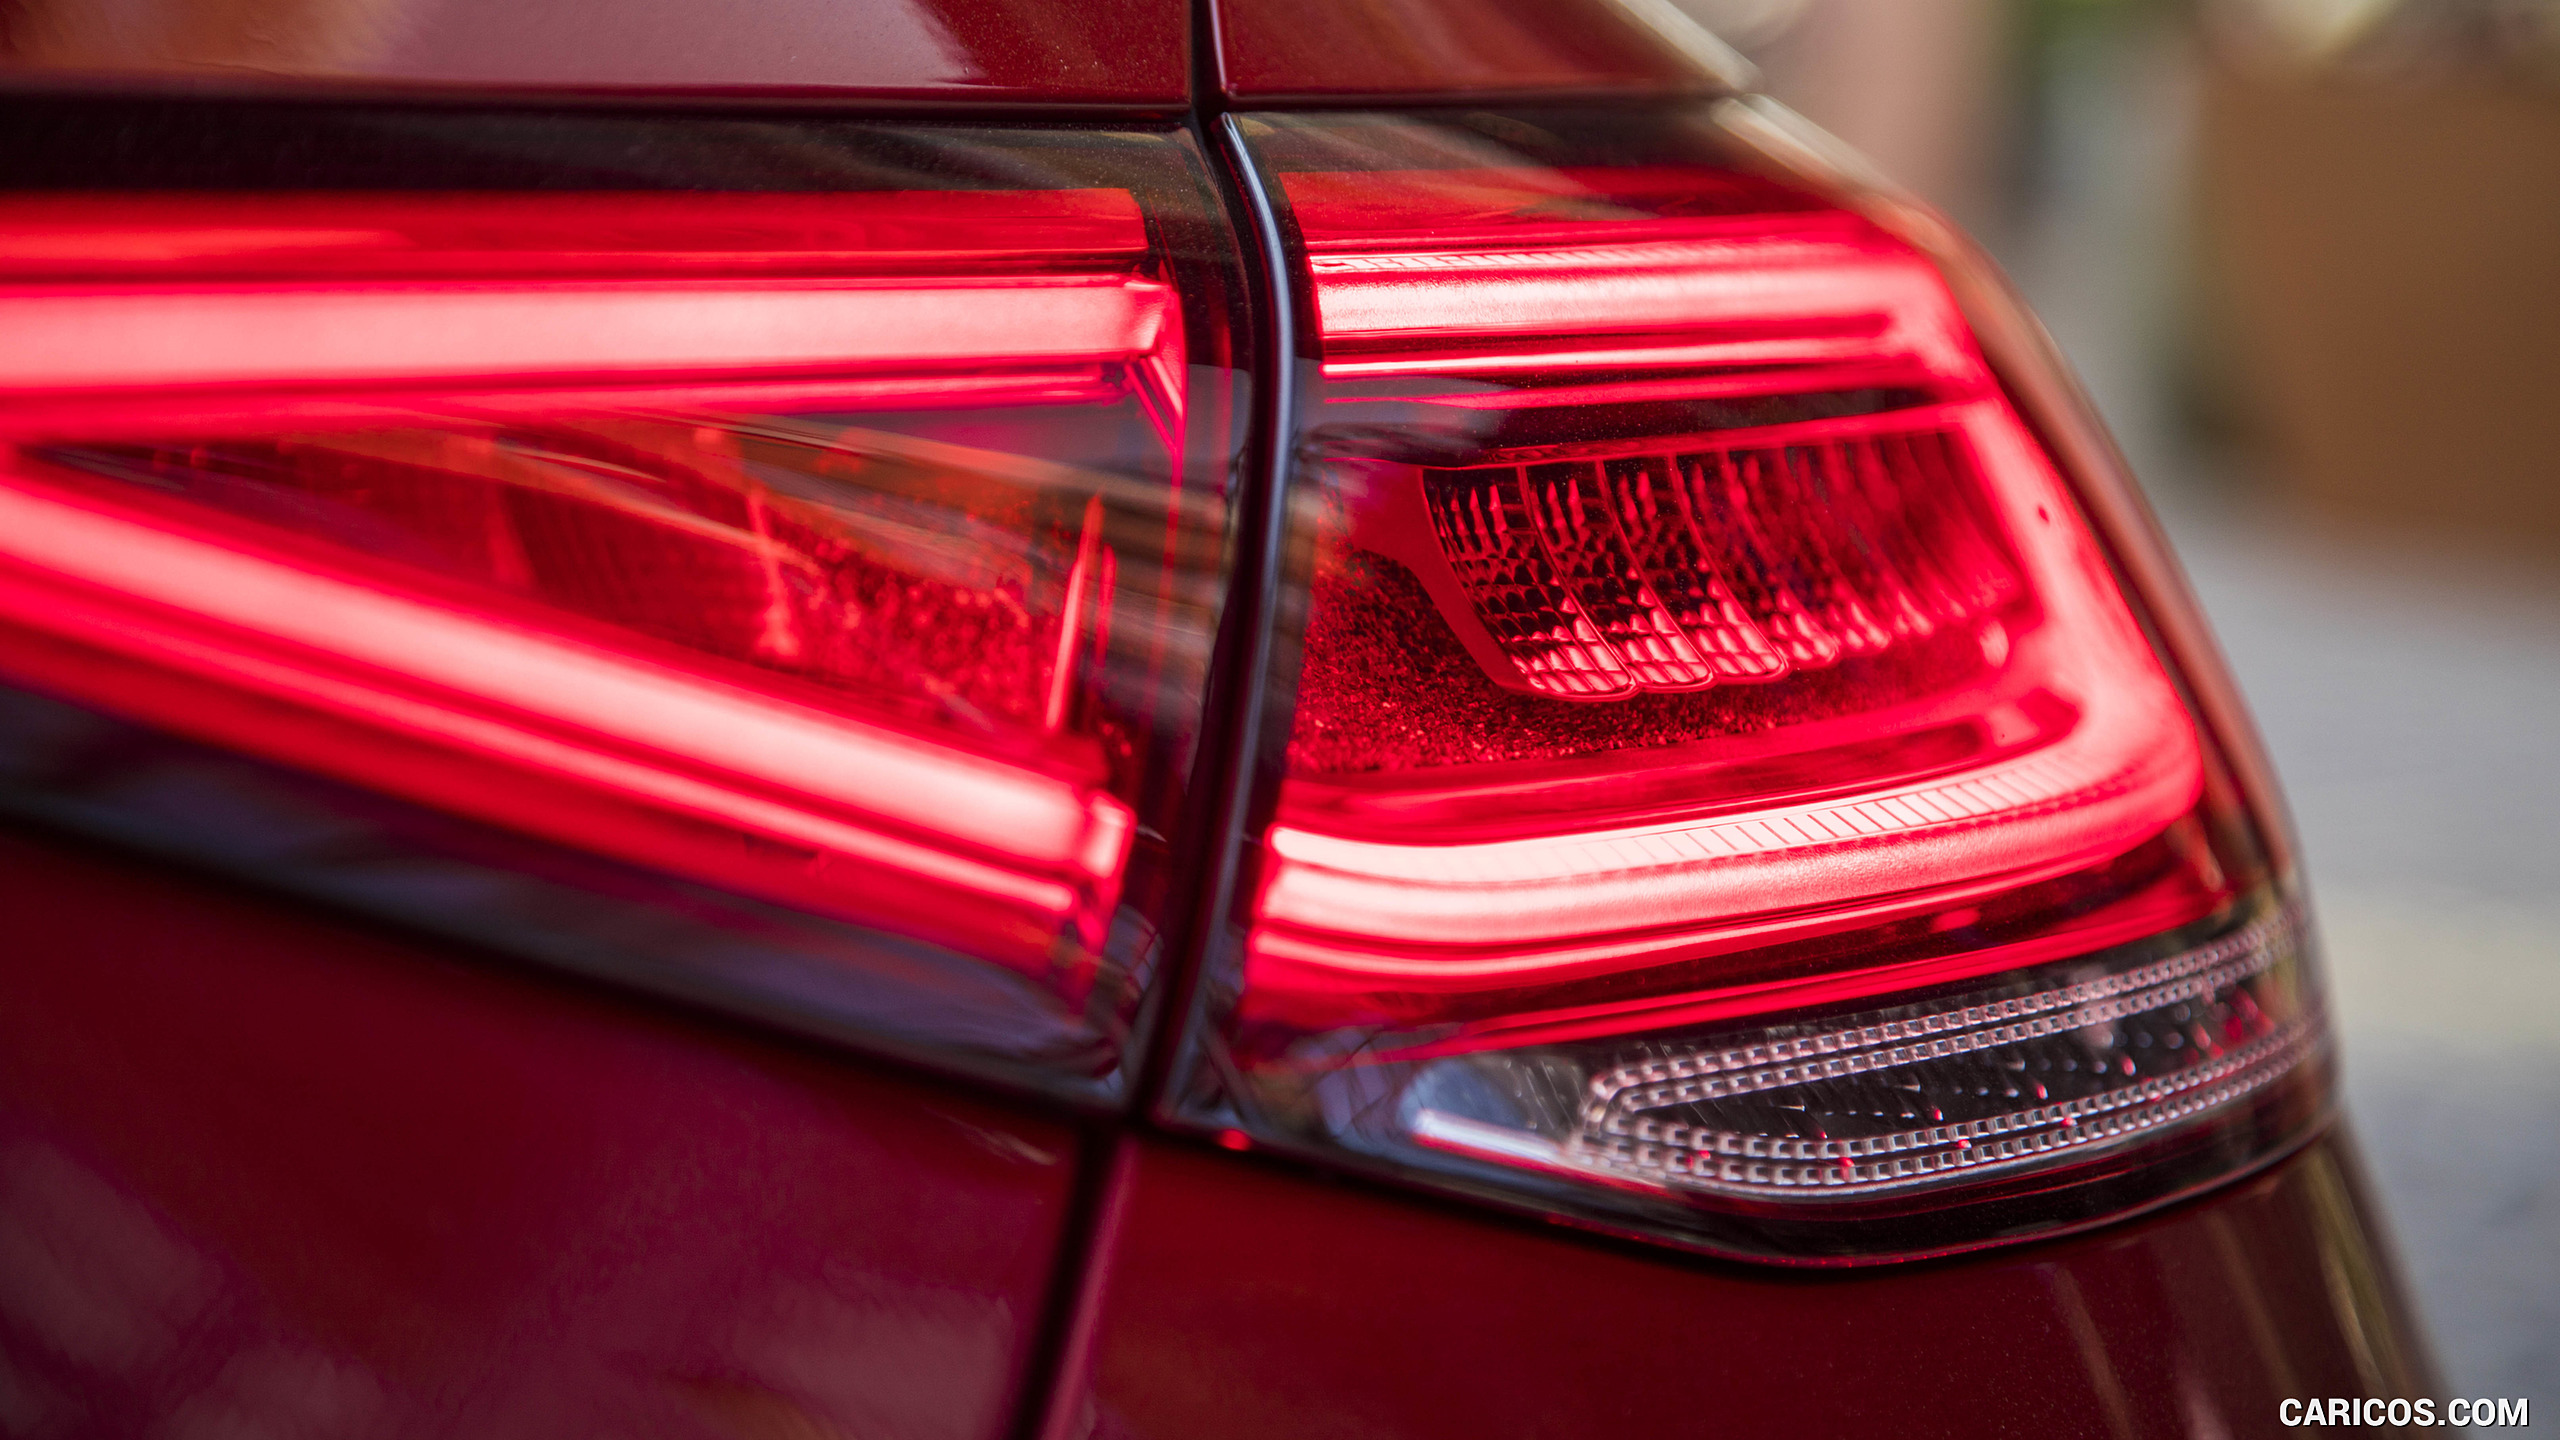 2019 Mercedes-Benz CLS 450 4MATIC (US-Spec) - Tail Light, #210 of 231